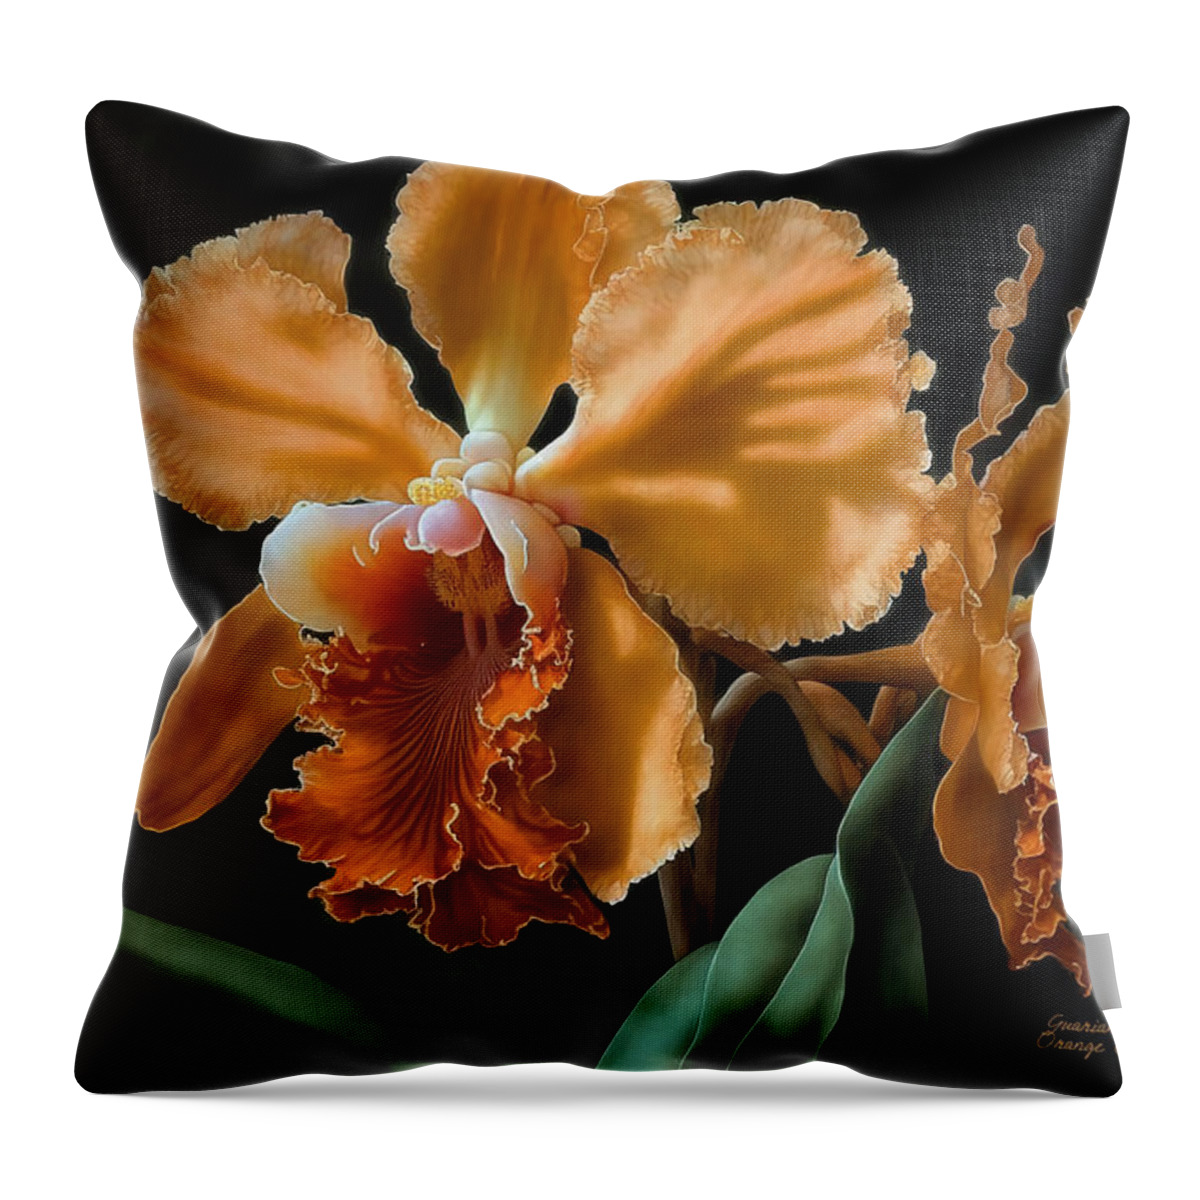 Watercolor Throw Pillow featuring the painting Orange Cattleya Orchid by Kai Saarto